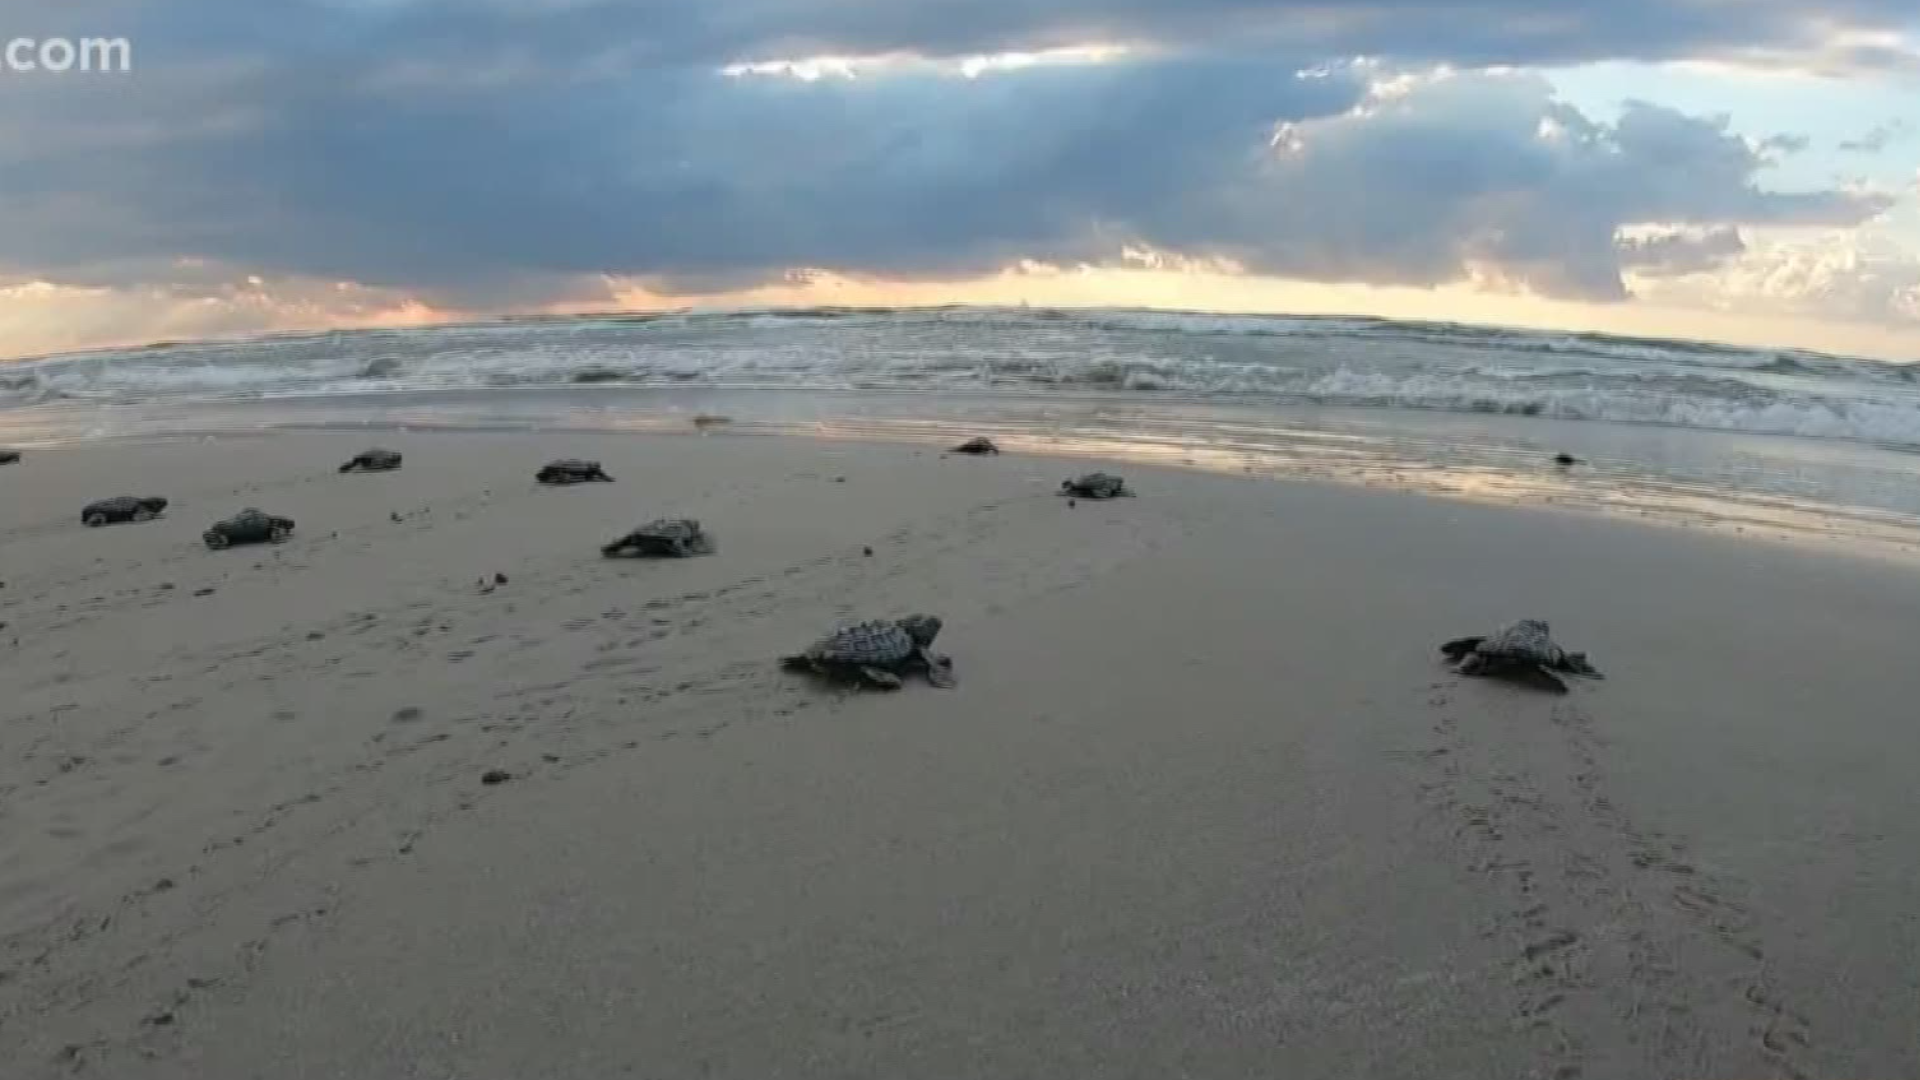 Over the years, many of you have gotten up early and driven out to the Padre Island National Seashore to watch the release of Kemp's Ridley sea turtles.